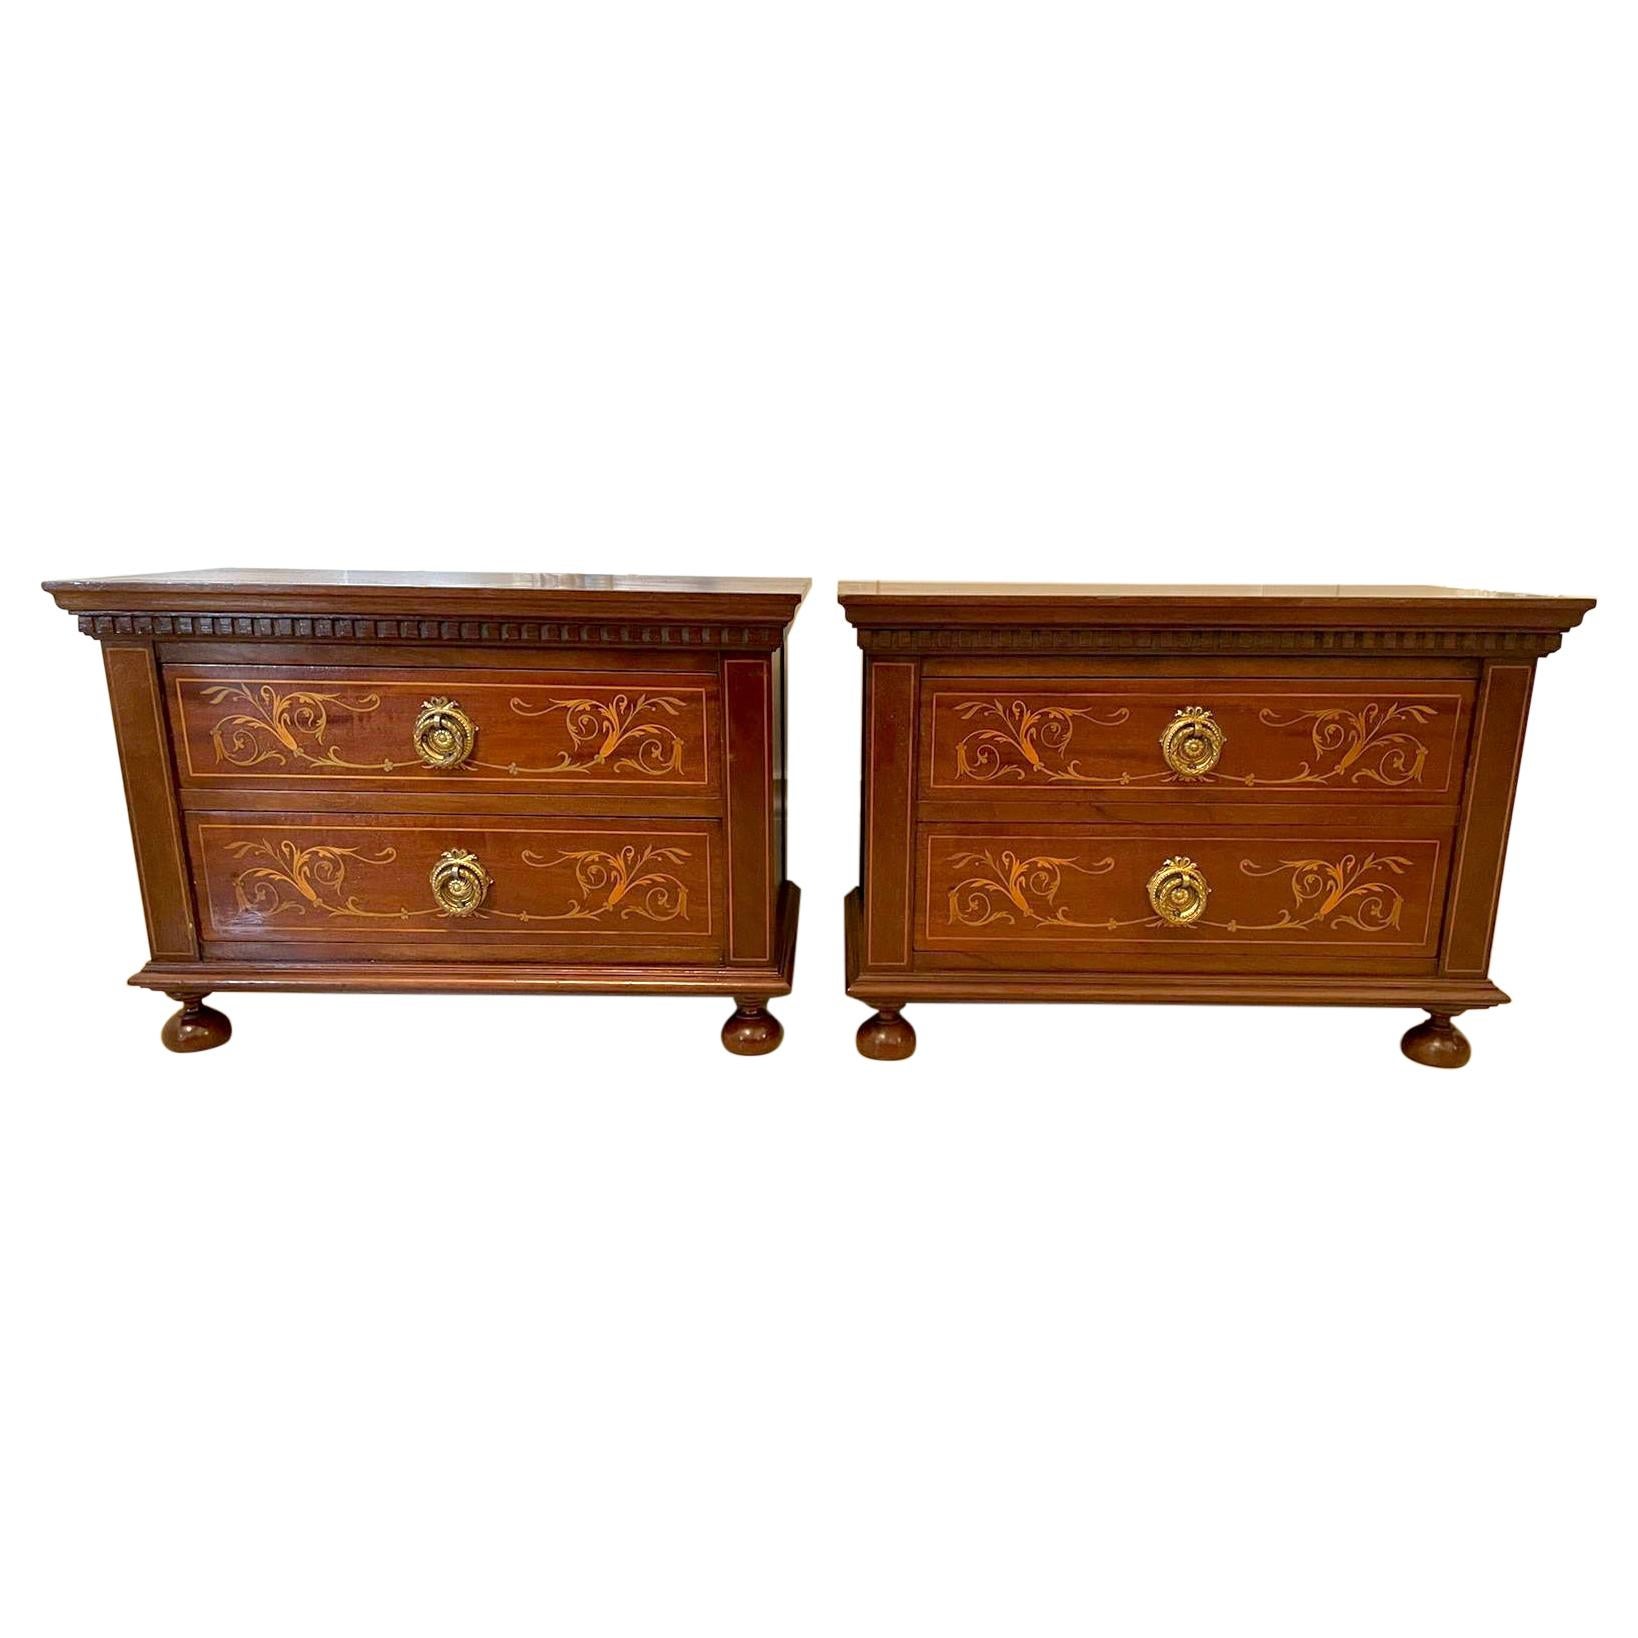 Quality Pair of Antique Edwardian Inlaid Mahogany Chests